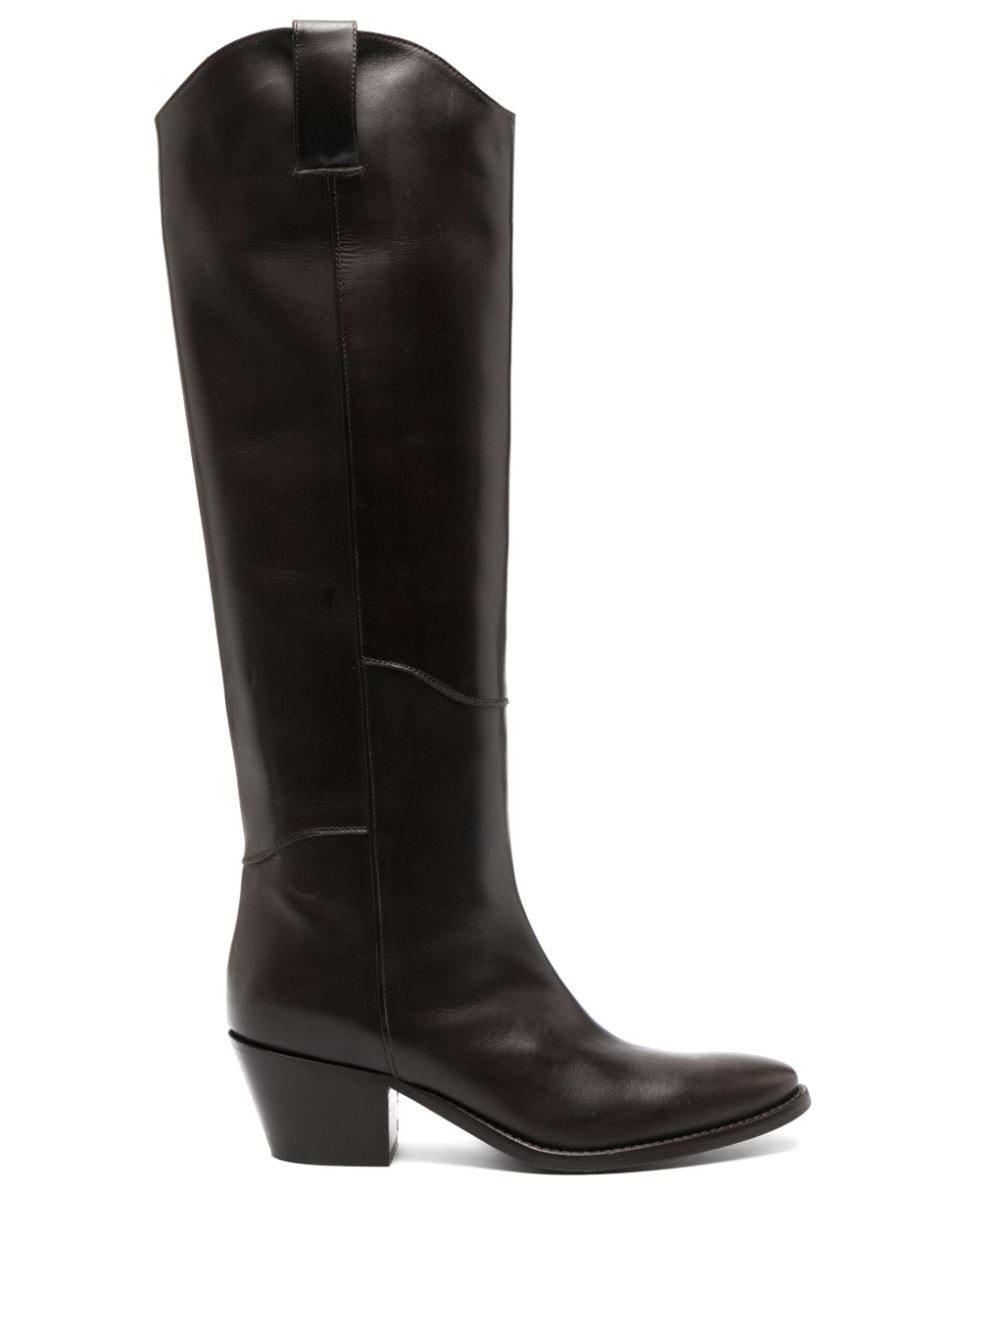 P.A.R.O.S.H. 65mm knee-high leather boots - Brown von P.A.R.O.S.H.